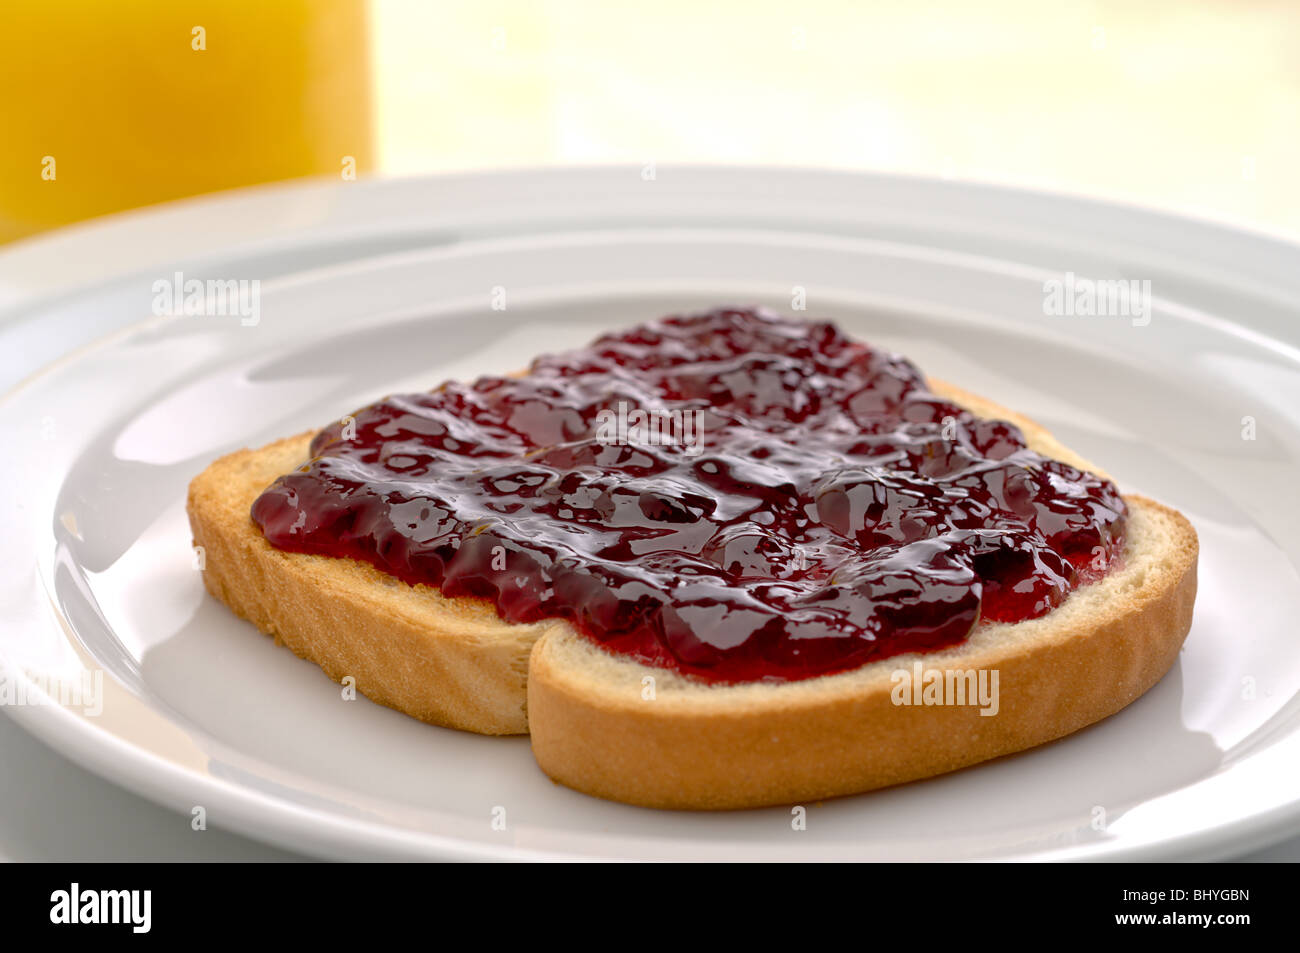 Morning breakfast with orange juice and jam or jelly on toast Stock Photo